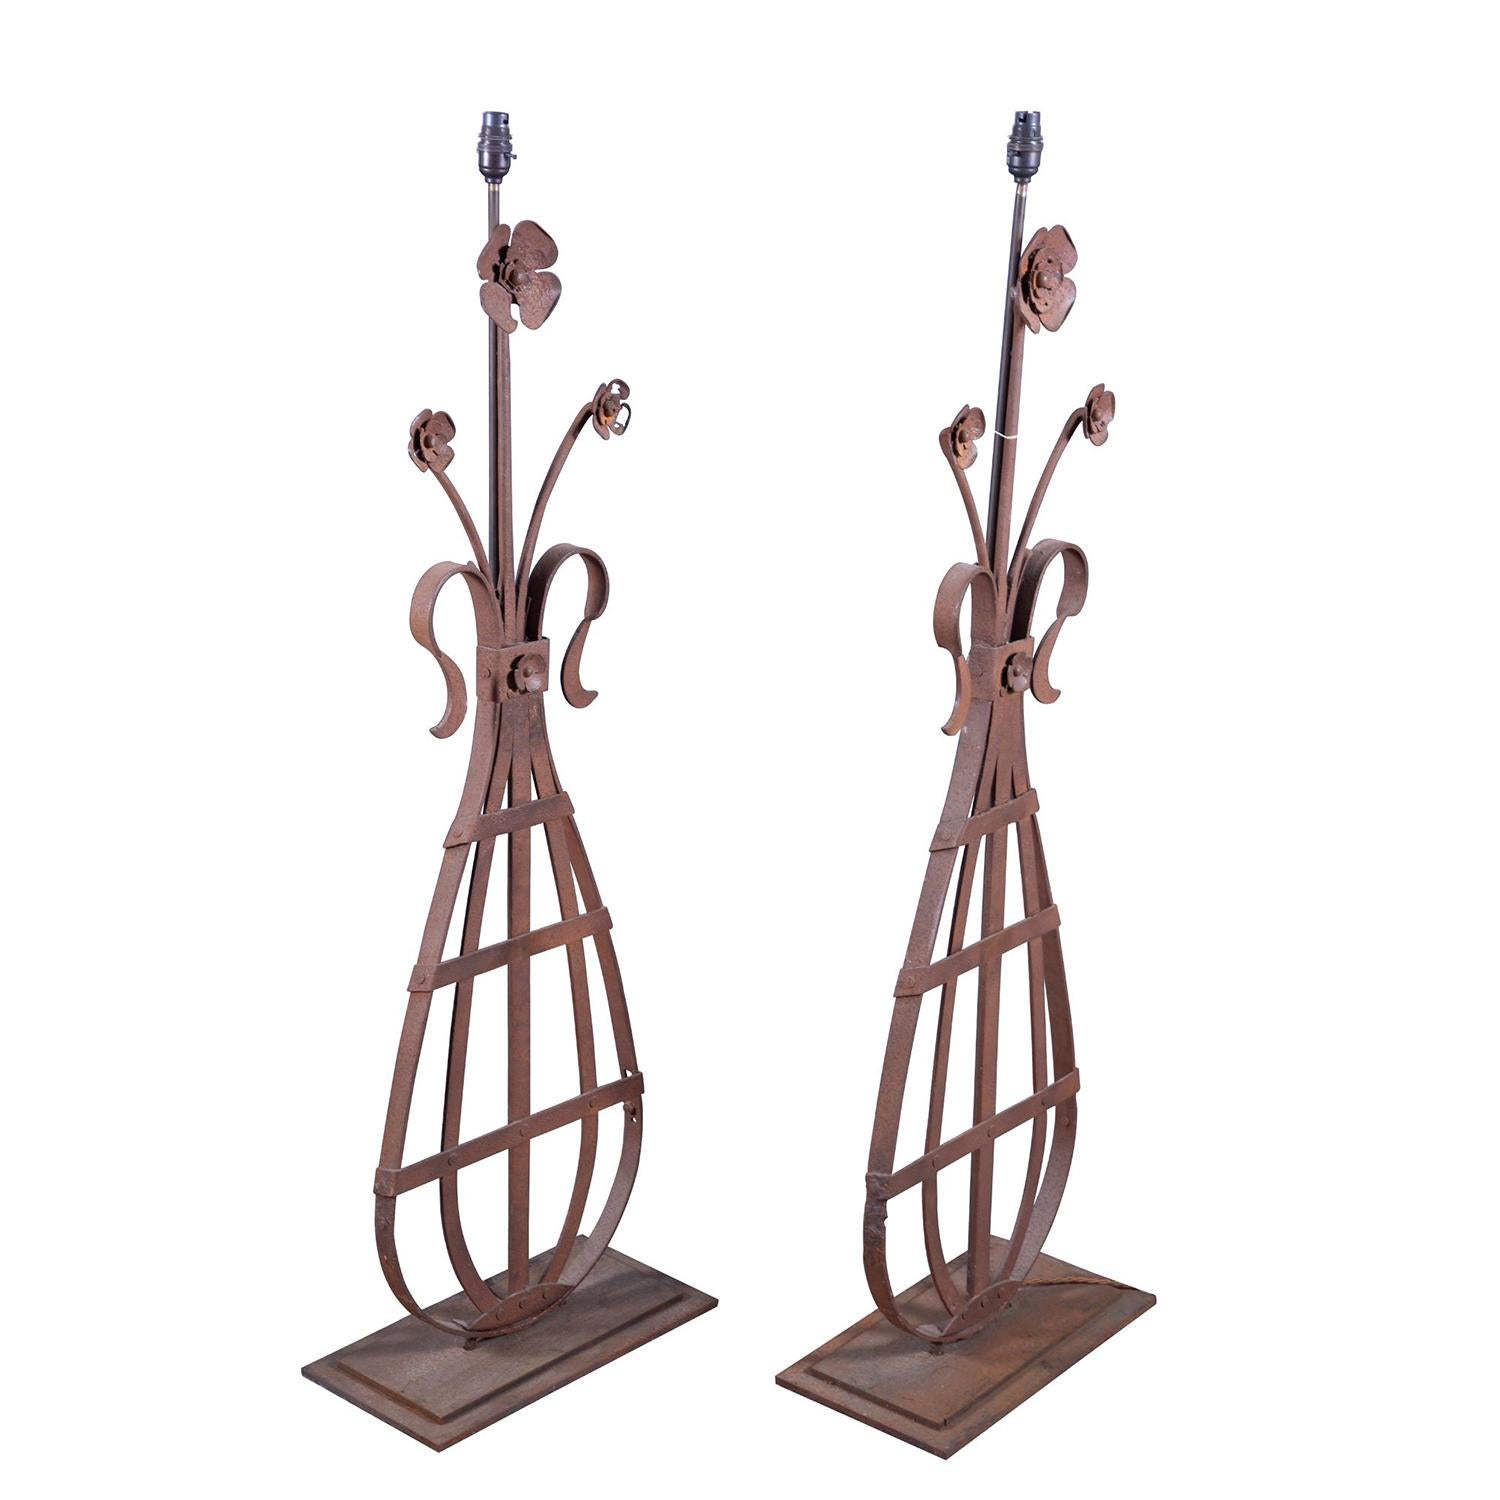 This pair of 19th century lamps are made from architectural fragments of a French 19th century metal gate post in the shape of a vase with flowers. This piece has been rewired with silk cord to UK PAT tested standards.